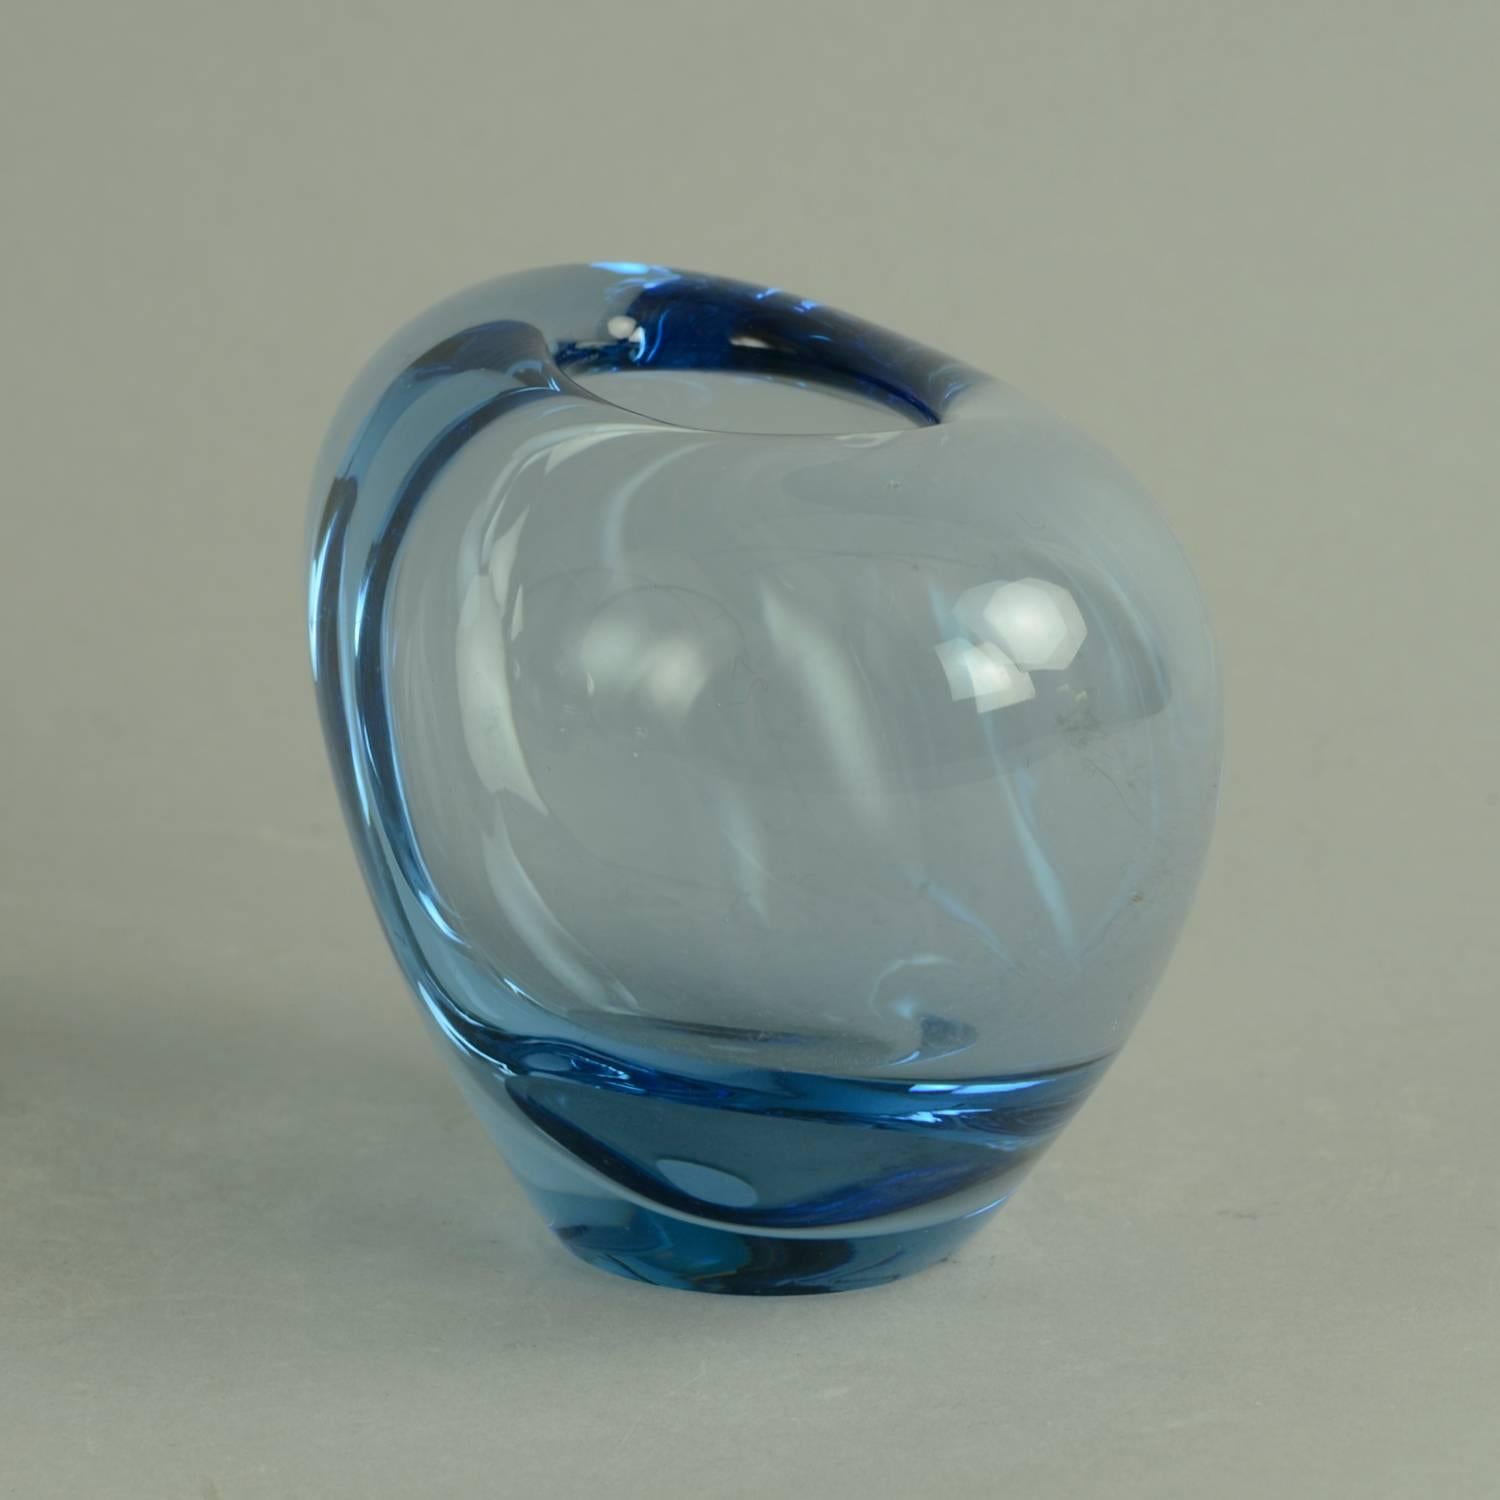 1. Heart shaped glass vase in pale blue glass, 1950s-1960s.
Measures: Height 4" (10cm), width 6" (15.5cm)
Engraved "Holmegaard PL 220127" No. N8701

2. Heart shaped glass vase in pale blue glass, 1958.
Measures: Height